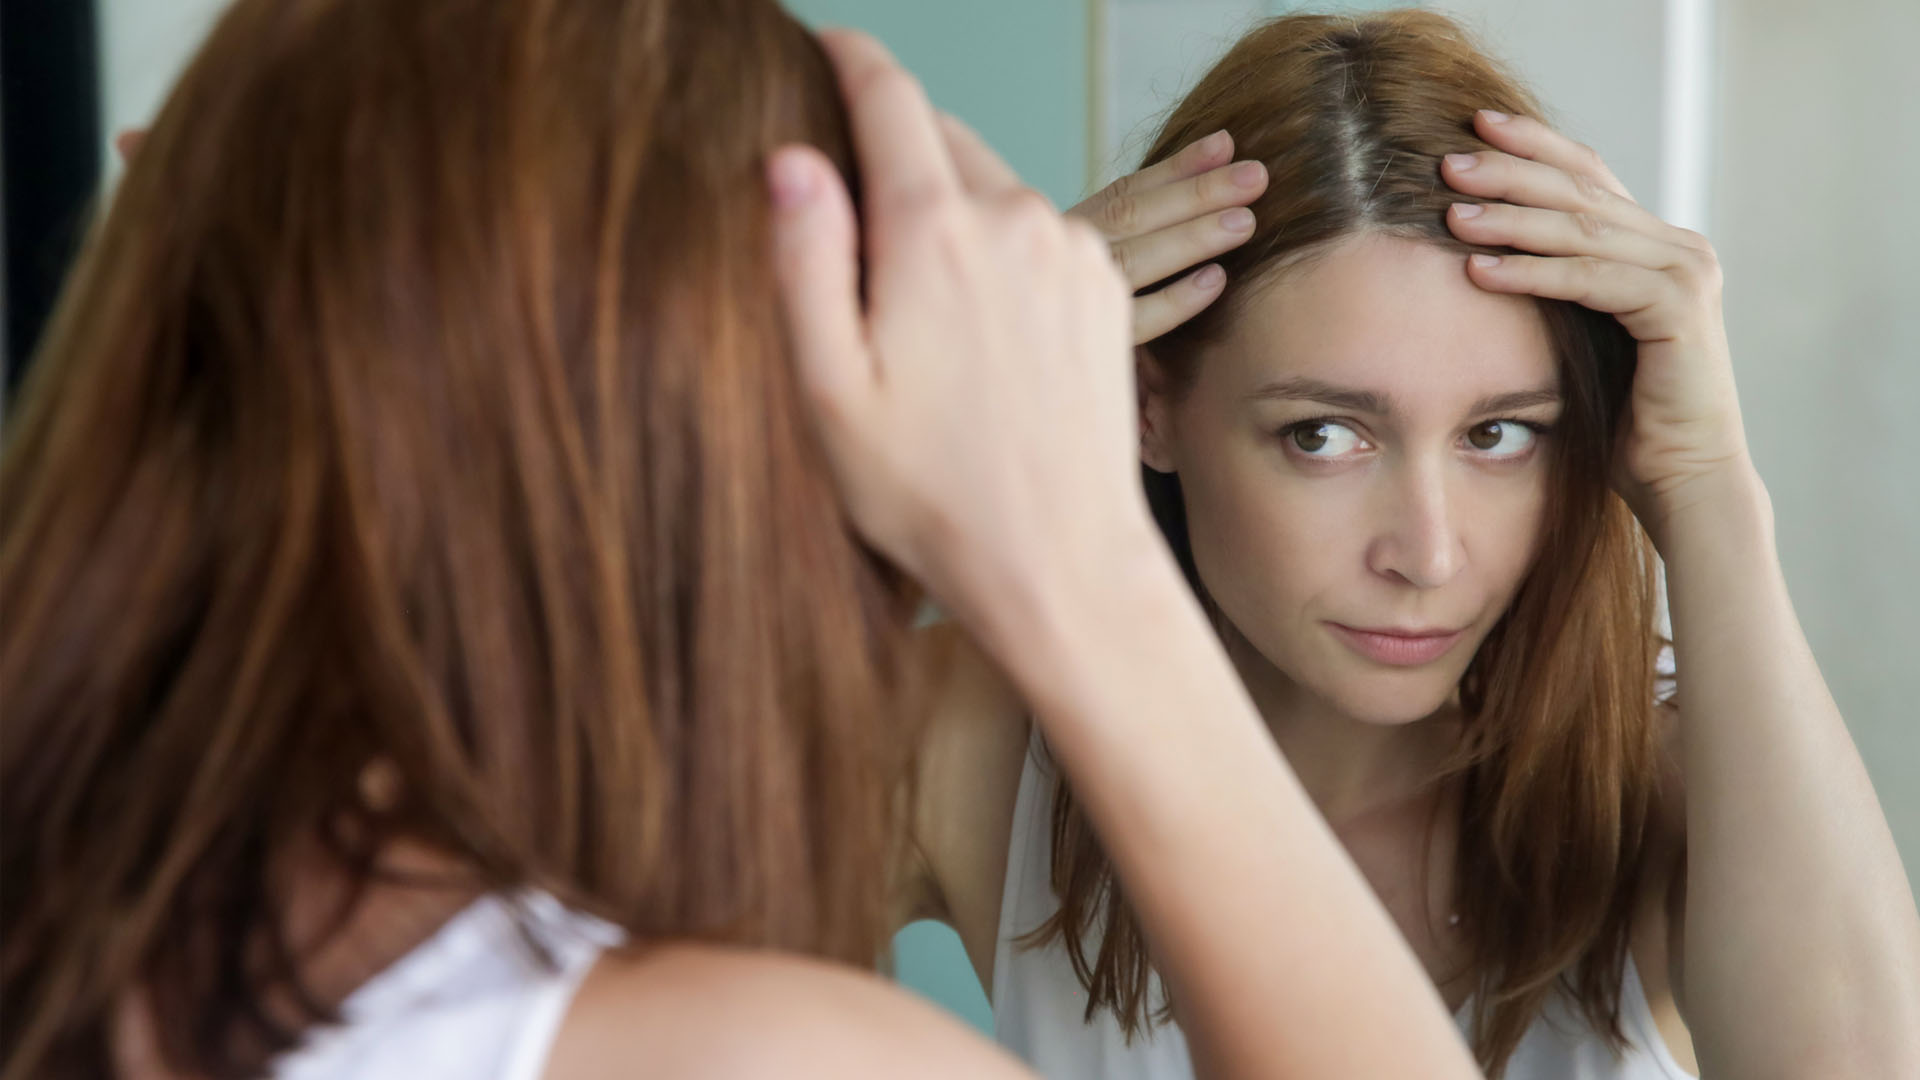 Image depicts a woman inspecting her hair for grays in a mirror